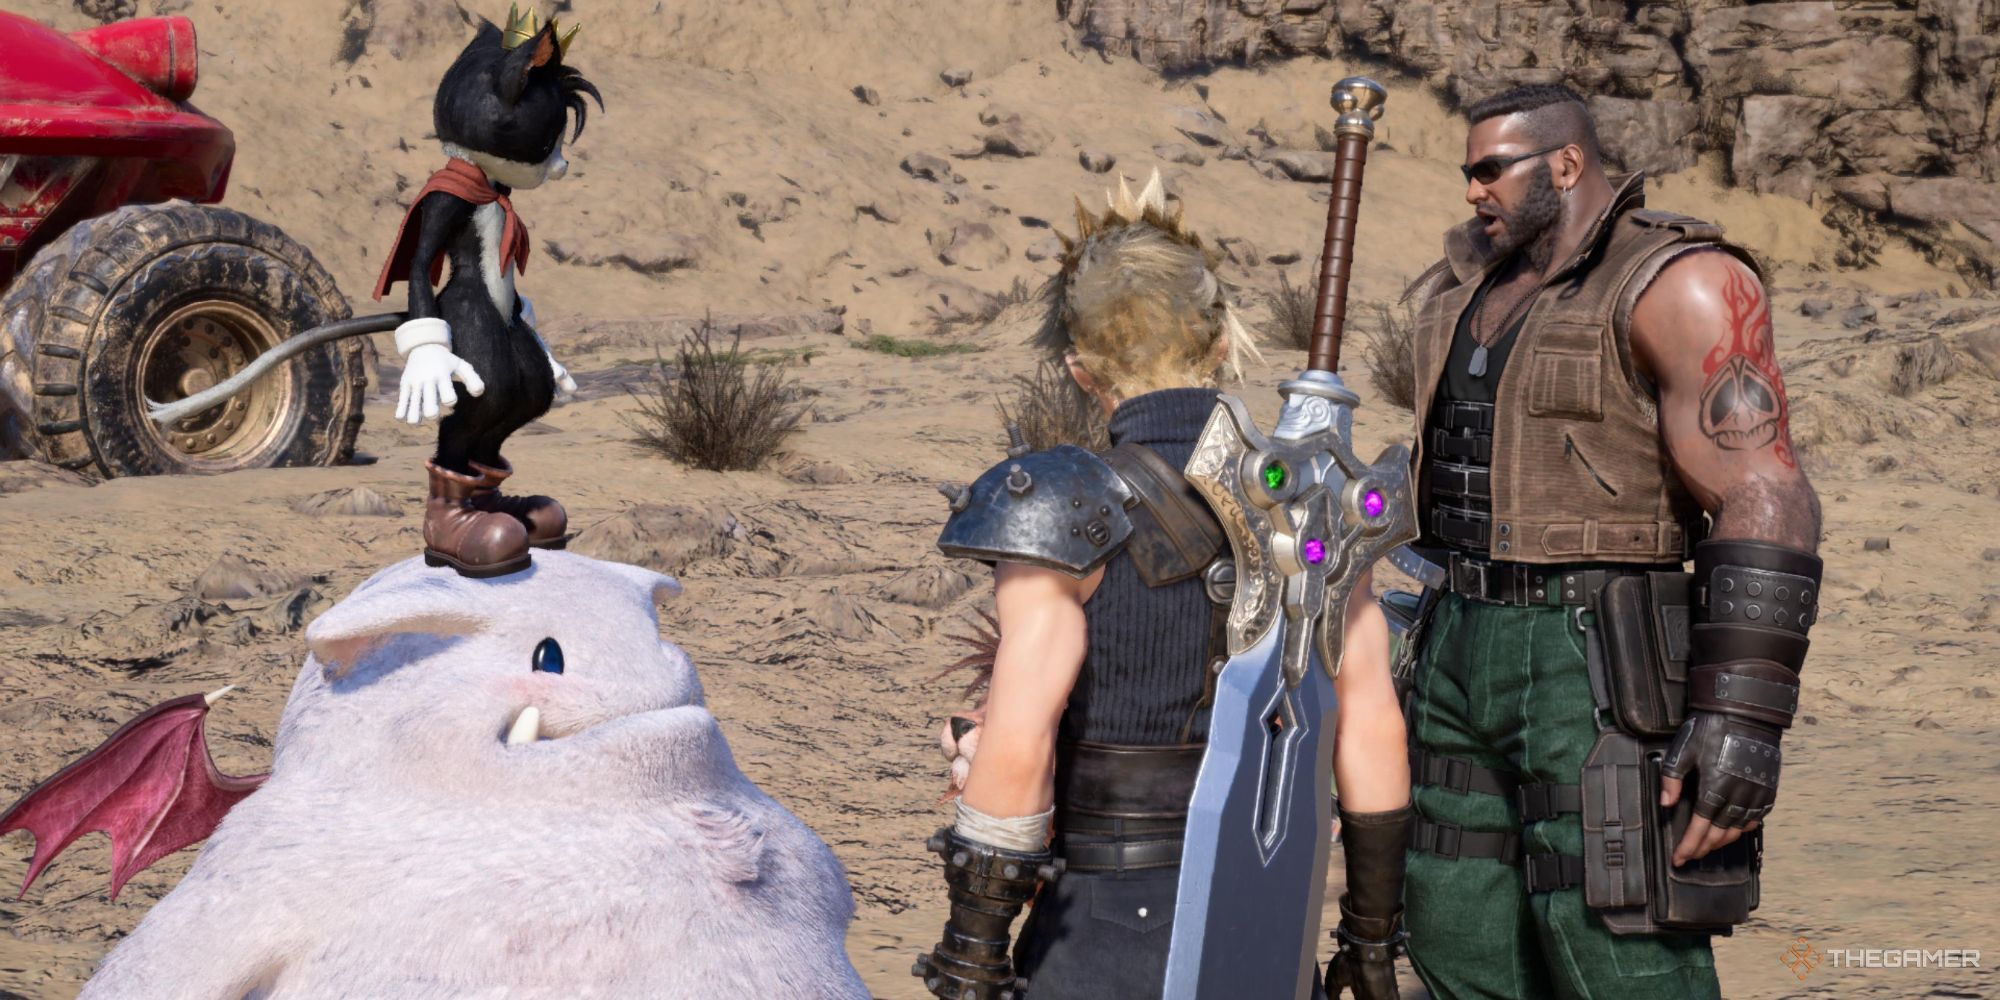 Cloud, Barret, and Cait Sith talking about where to head next at the beginning of Chapter 9 in Final Fantasy 7 Rebirth.